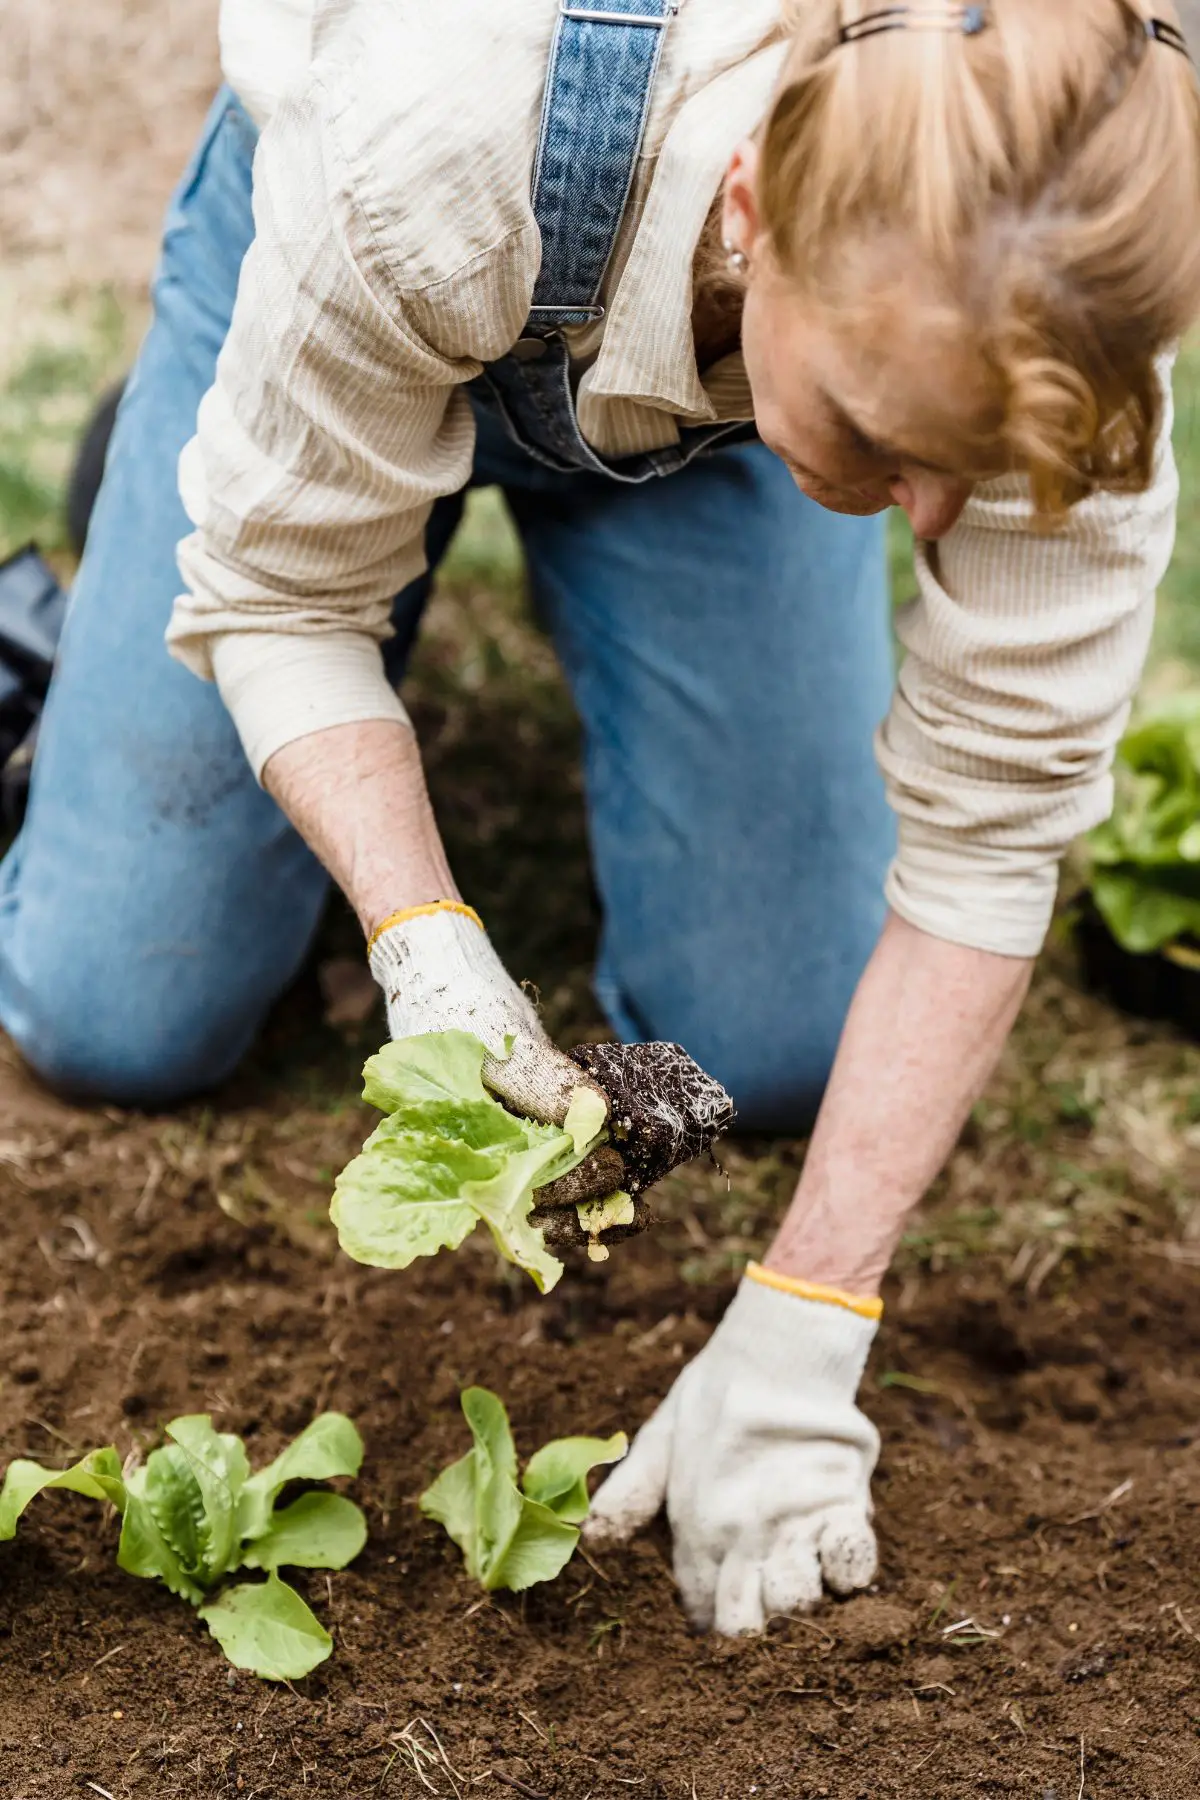 This is a picture of a female gardener on her hands and knees planting vegetables.  She's wearing a cream button up shirt and overalls.